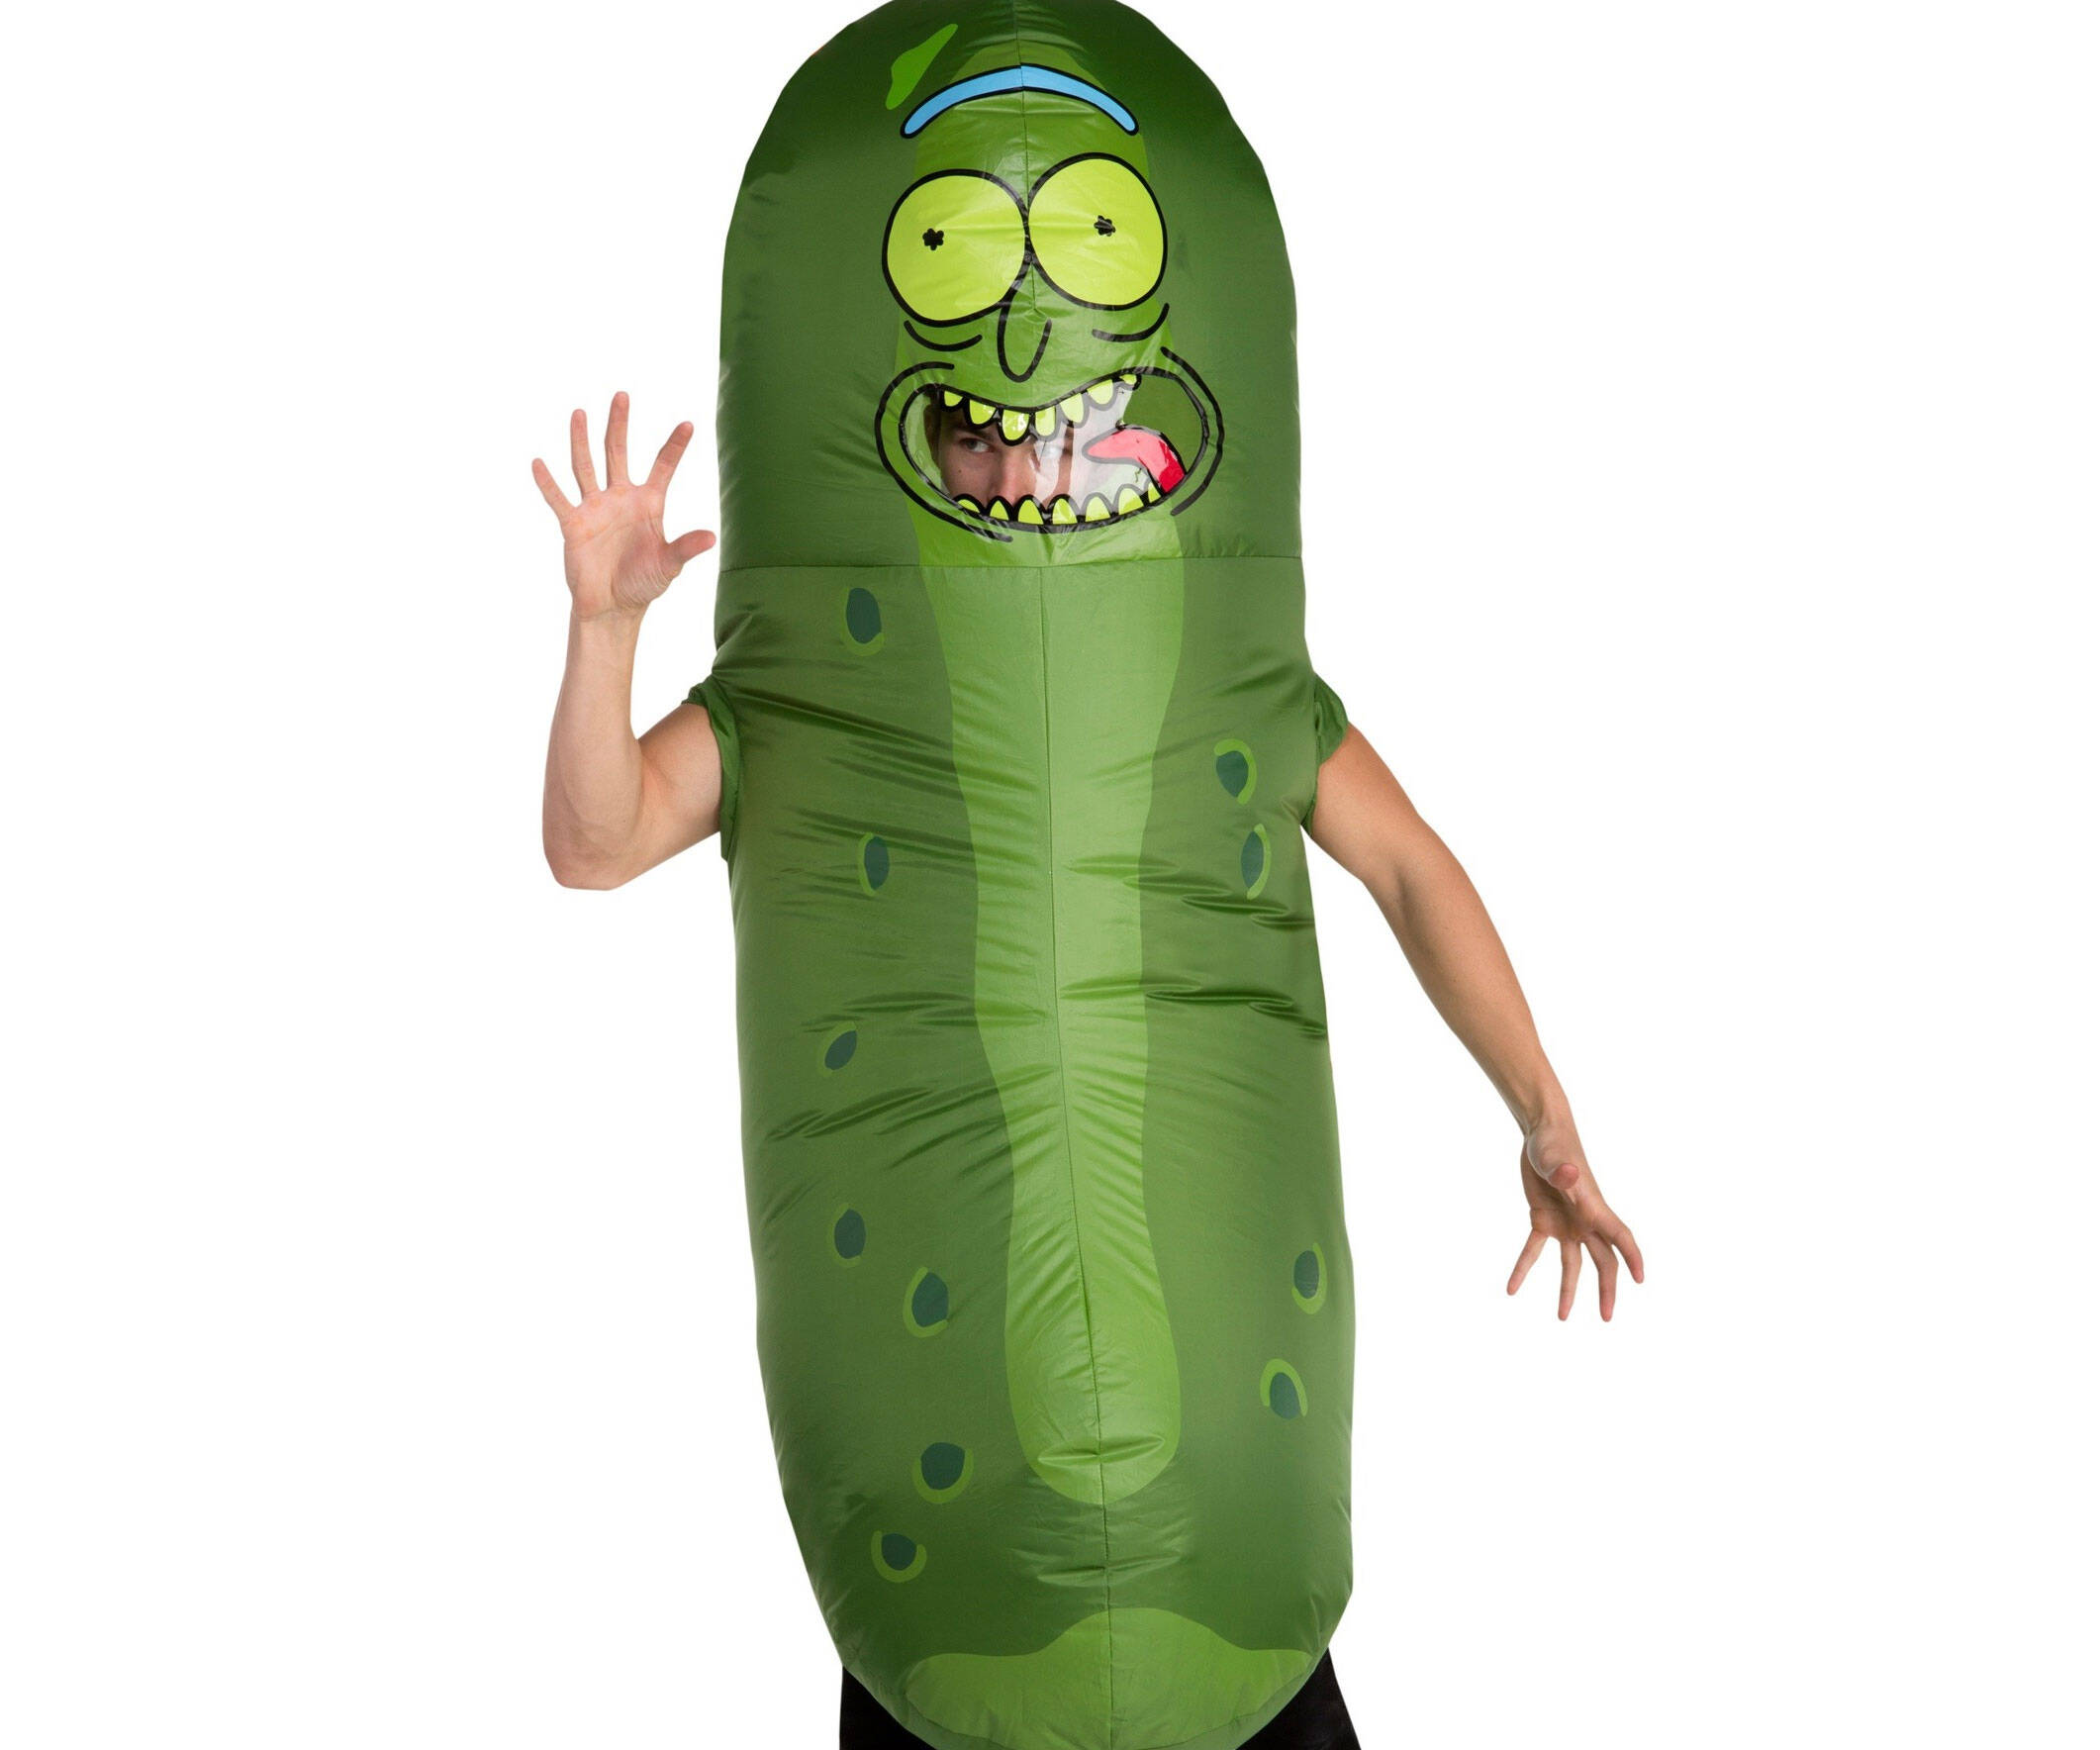 Pickle Rick Inflatable Costume - coolthings.us